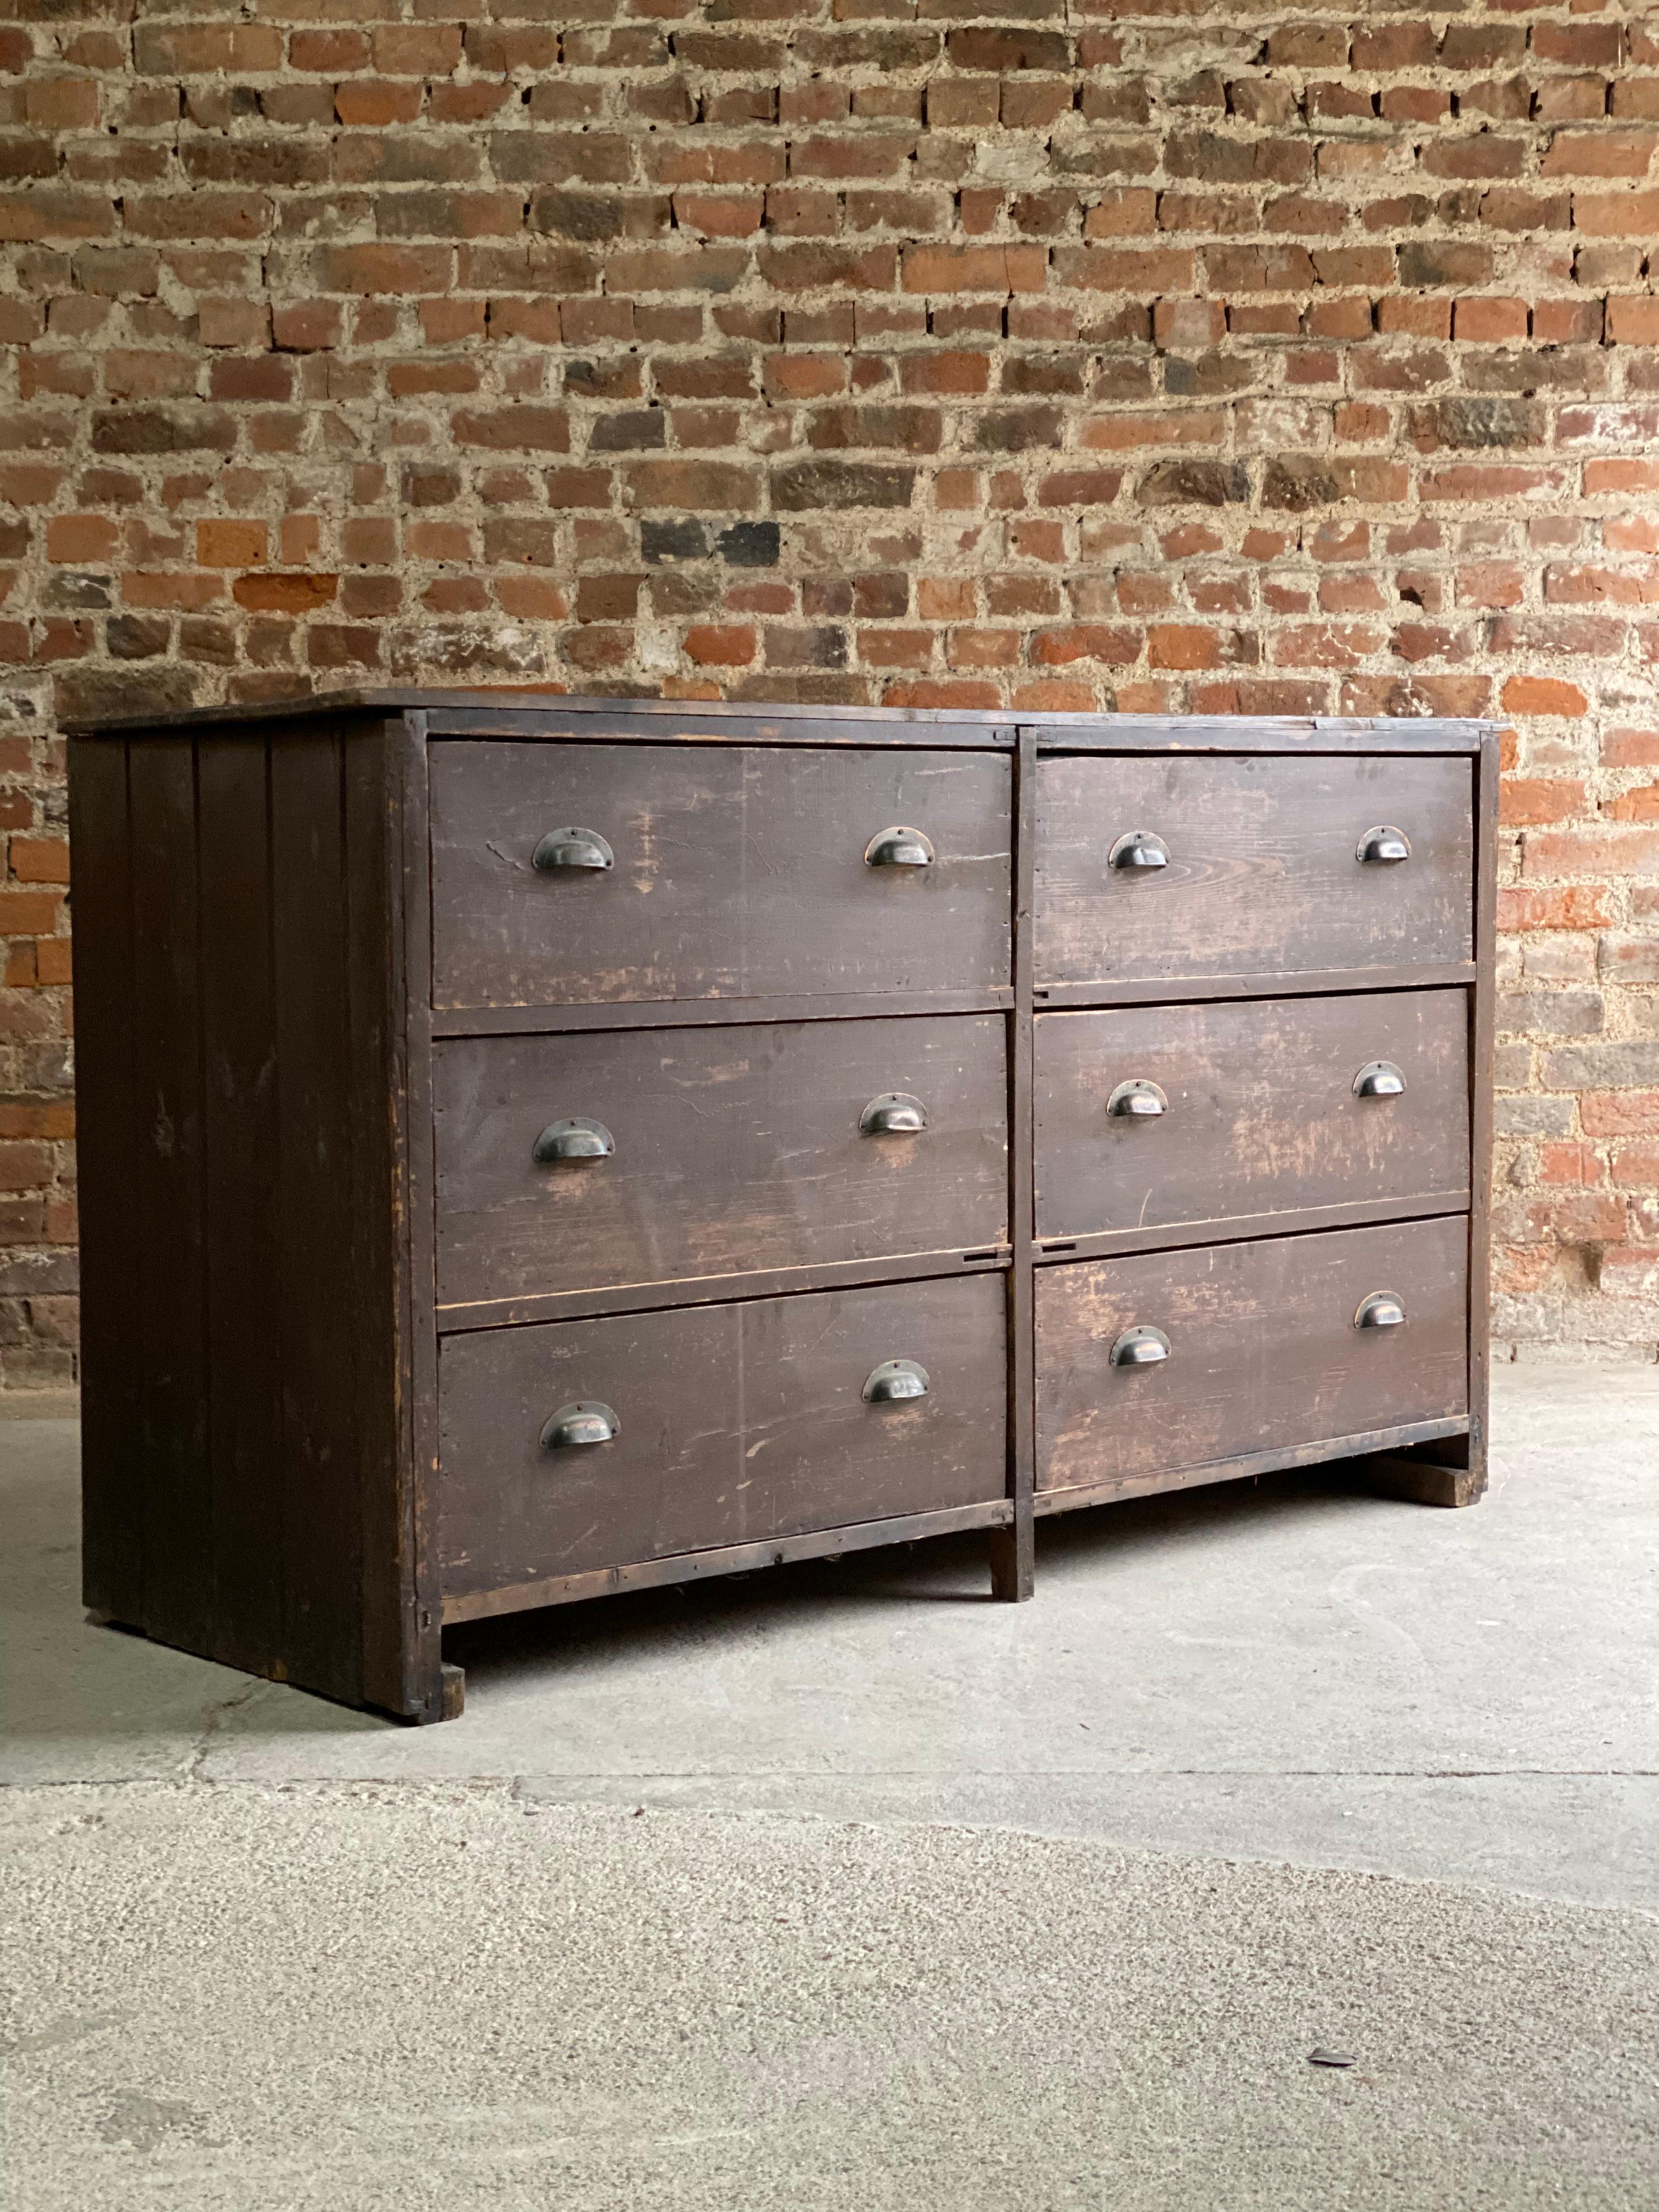 Large industrial haberdashery pine bank of drawers, circa 1890, the rectangular tongue and groove top over six large pull out drawers with original copper cup handles, original rustic appearance with great patina, perfect for that loft space or